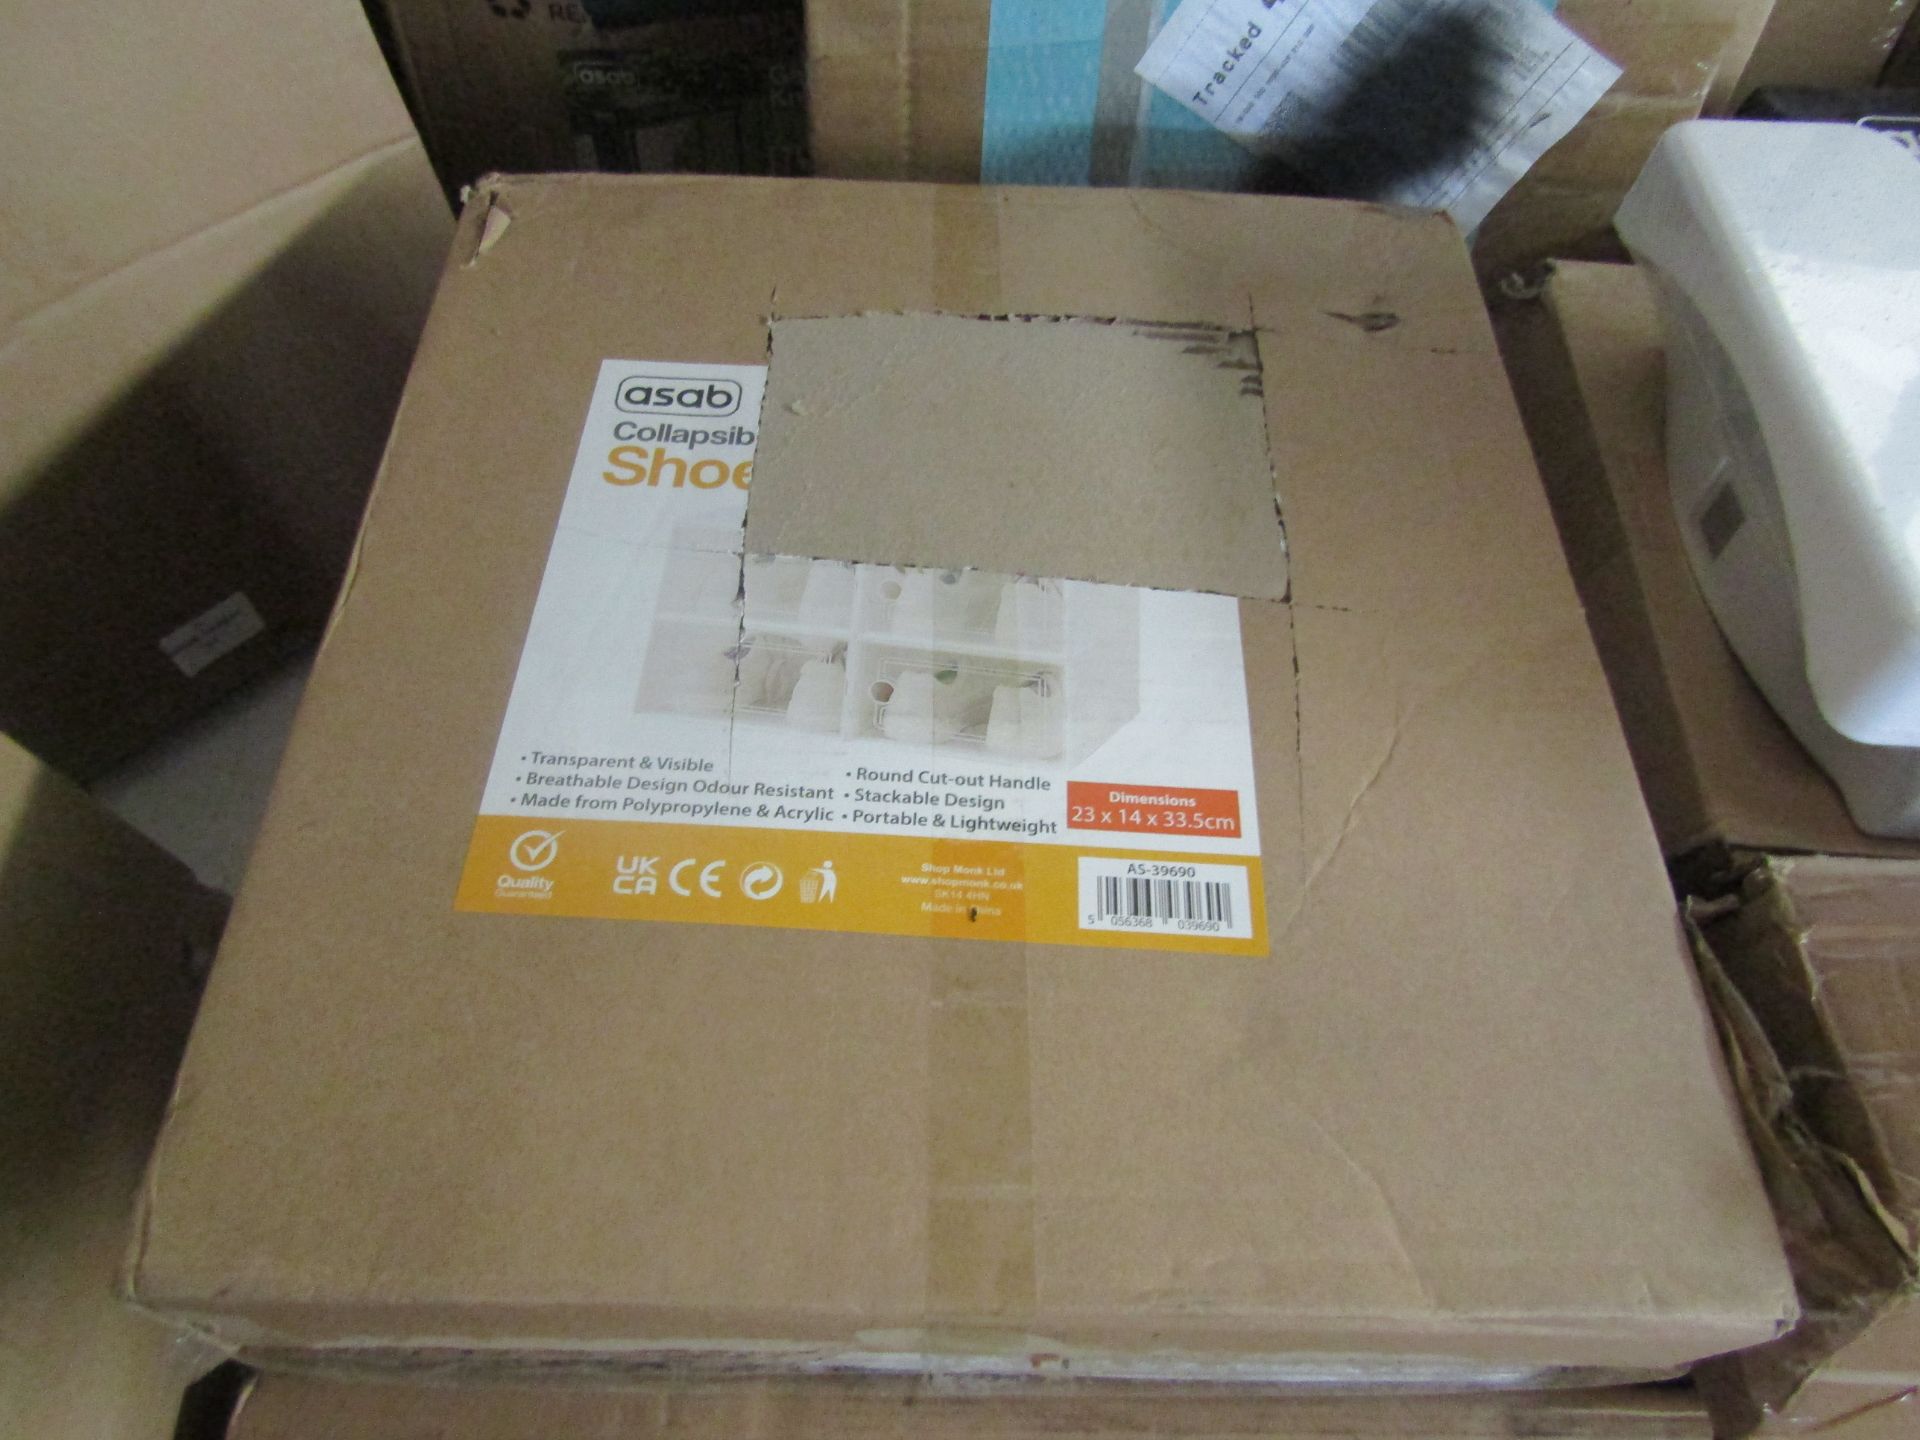 2x Asab Collapsible Shoe Boxes, Unchecked & Boxed.